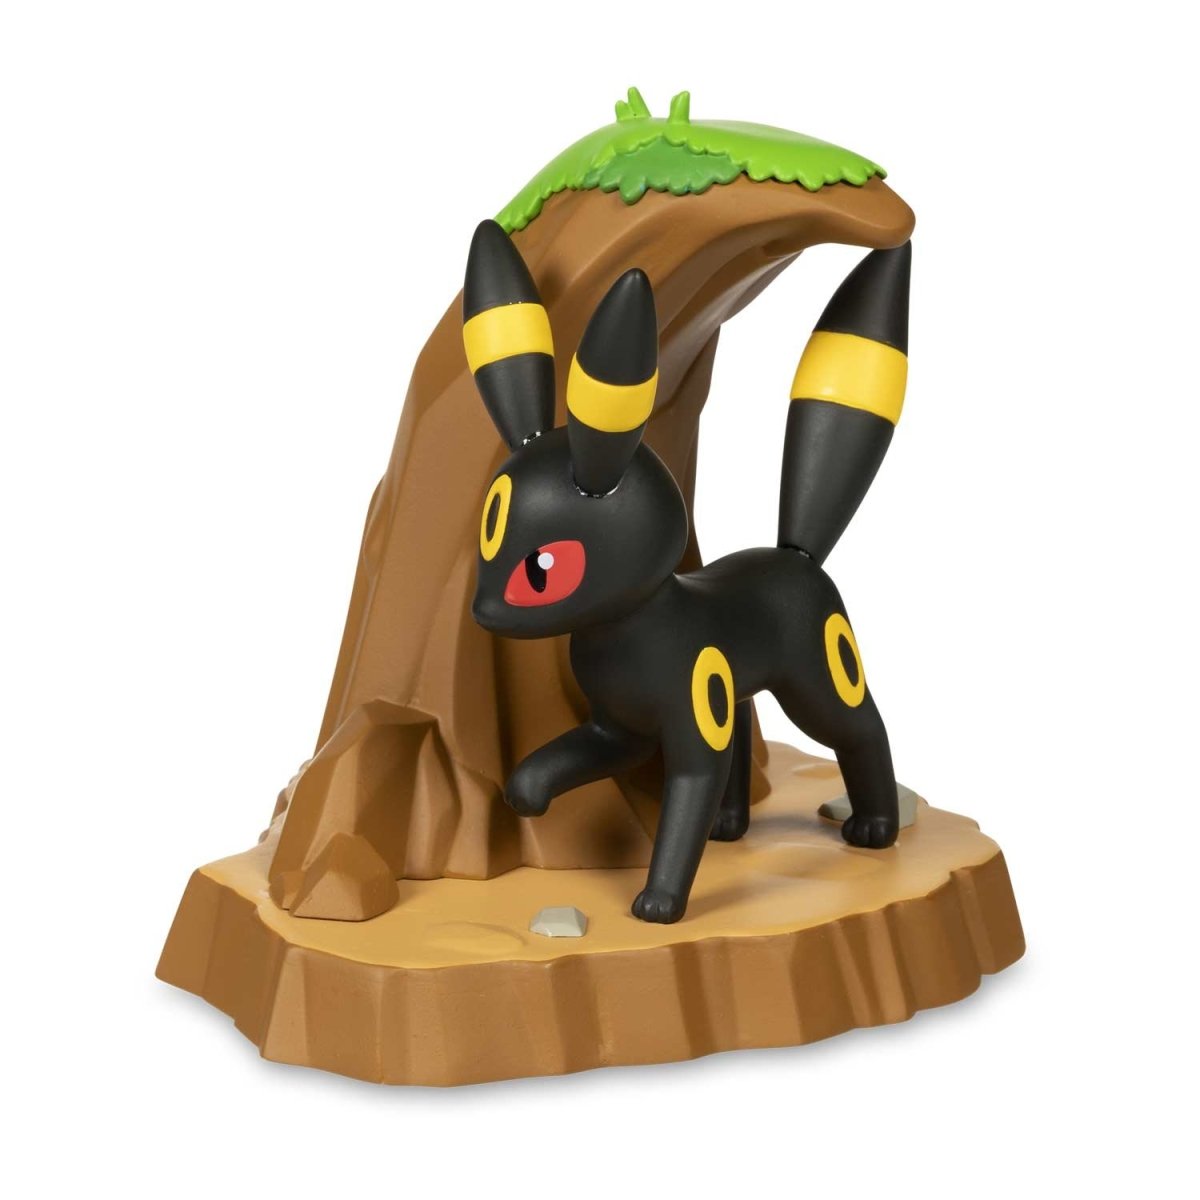 An Afternoon with Eevee & Friends: Umbreon